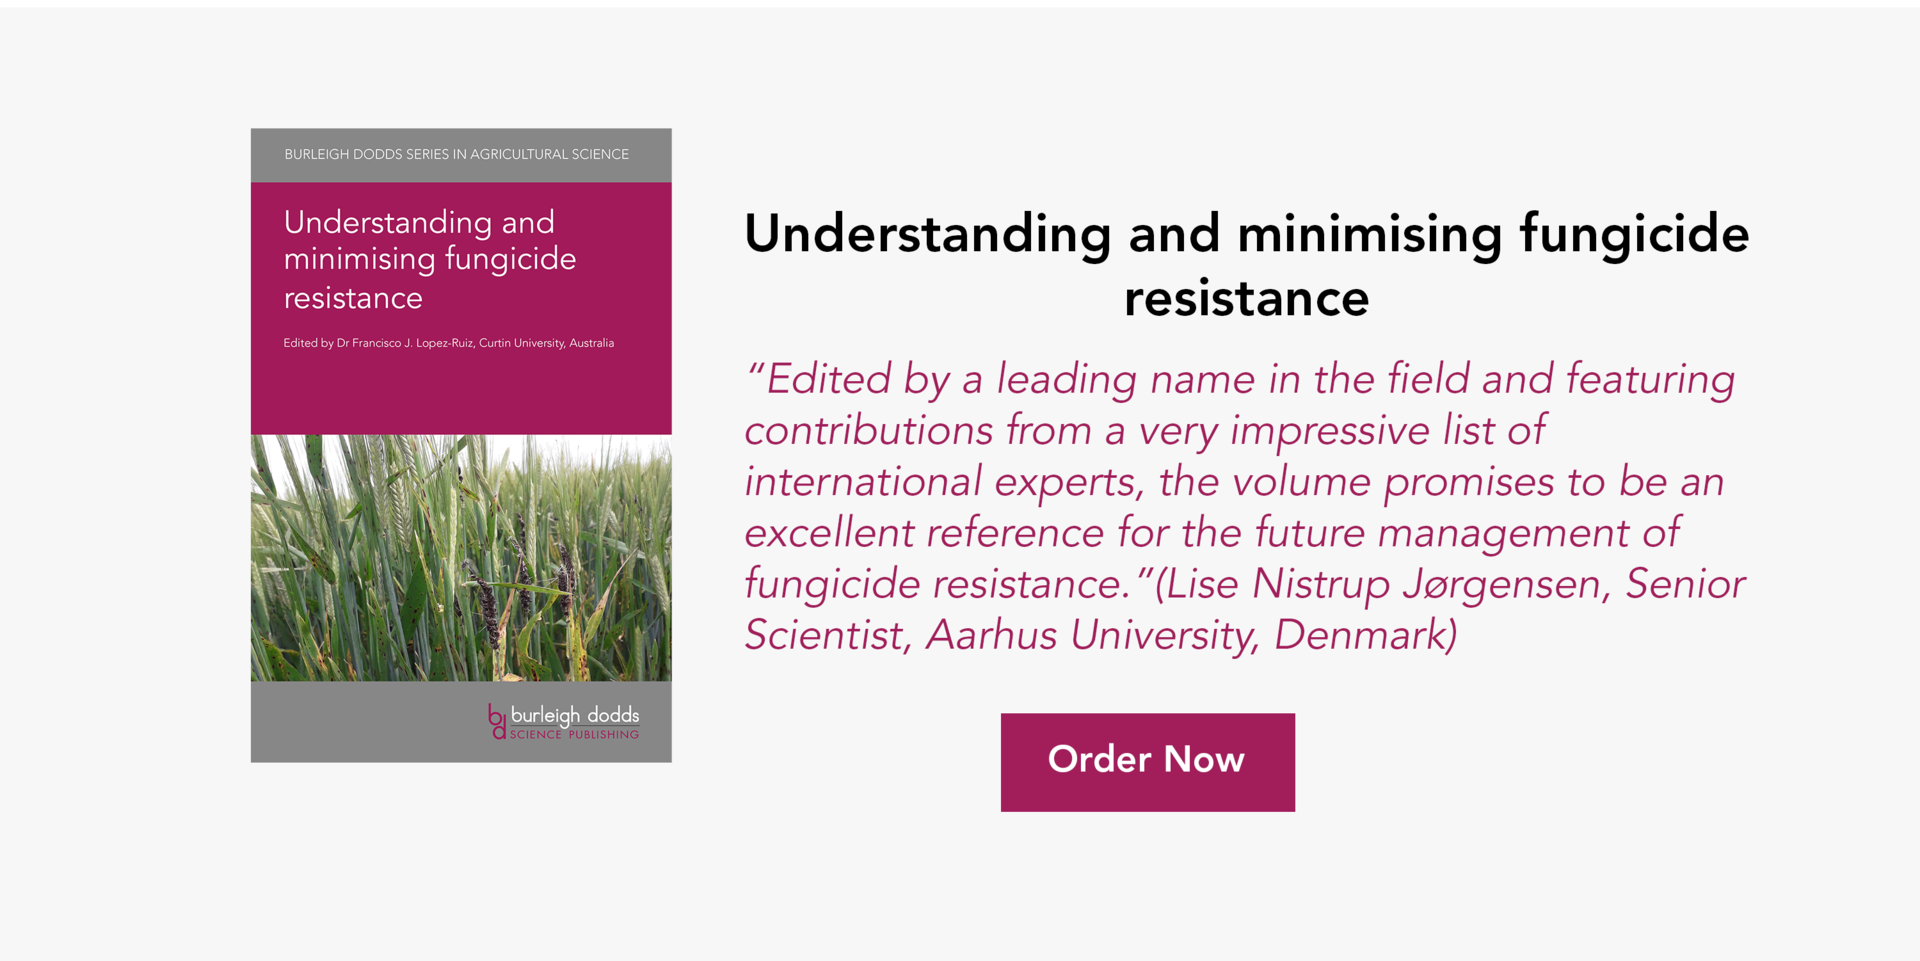 Understanding and minimising fungicide resistance